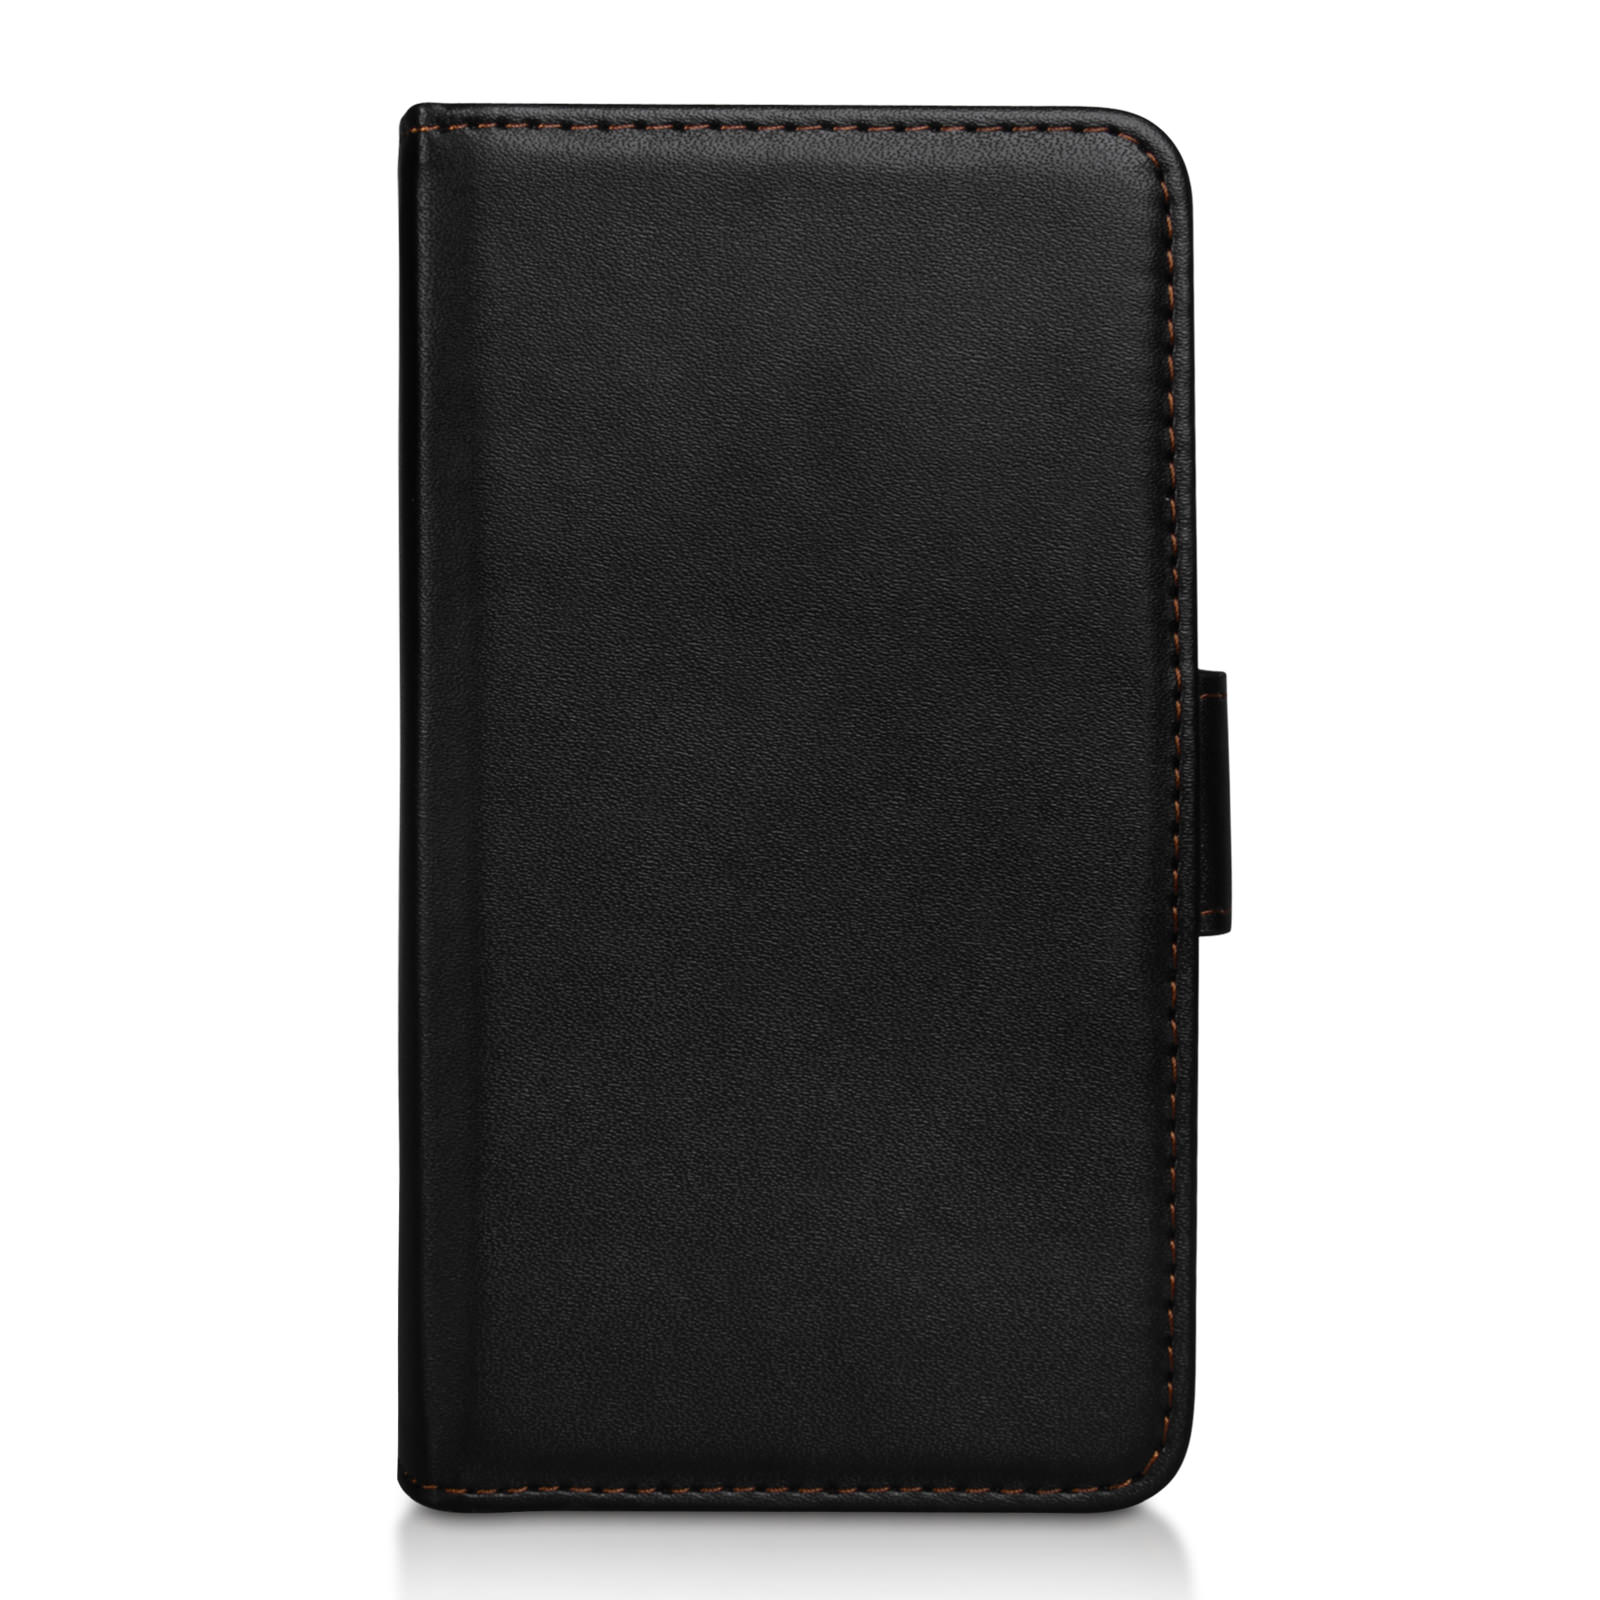 YouSave Accessories Nokia Lumia 630 Leather-Effect Wallet Case - Black